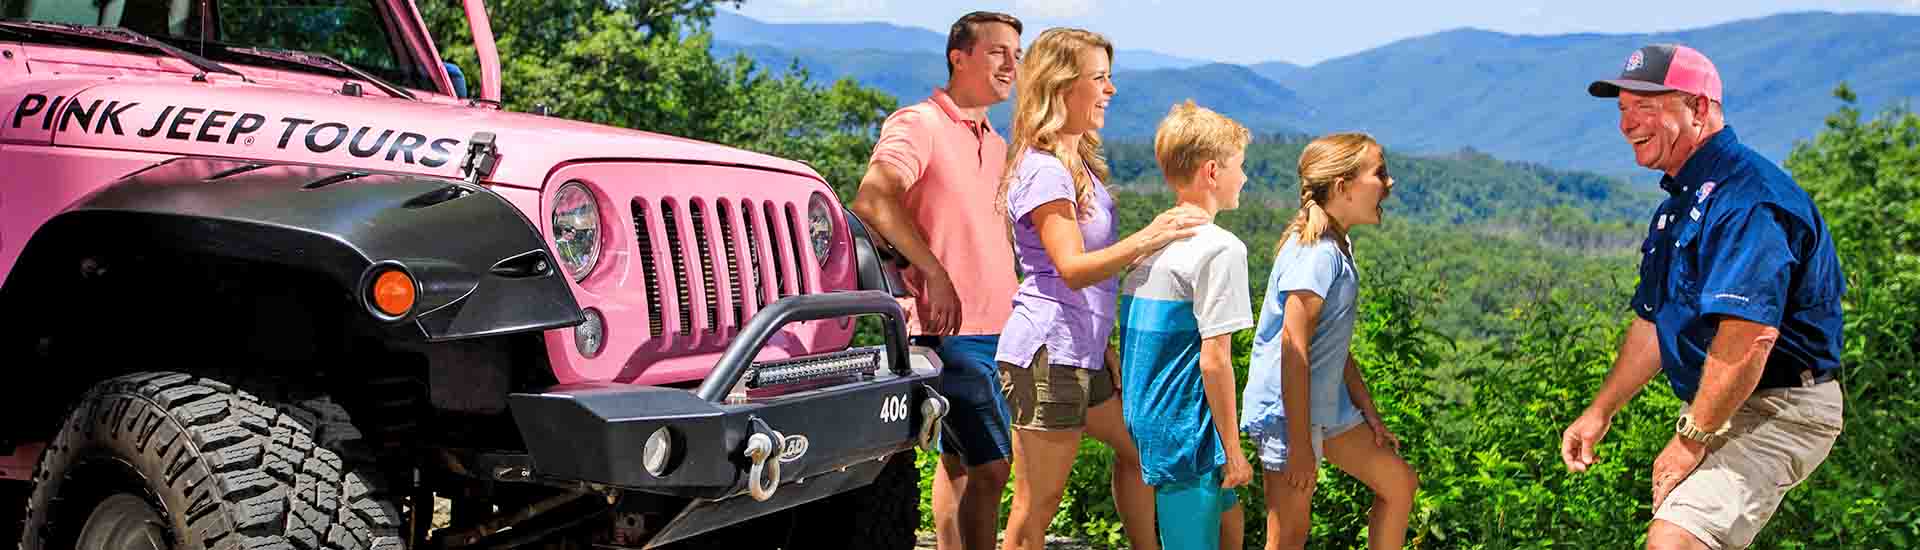 Pink Jeep tour guide laughing with guests next to jeep with clear summer view of Smoky Mountains in background